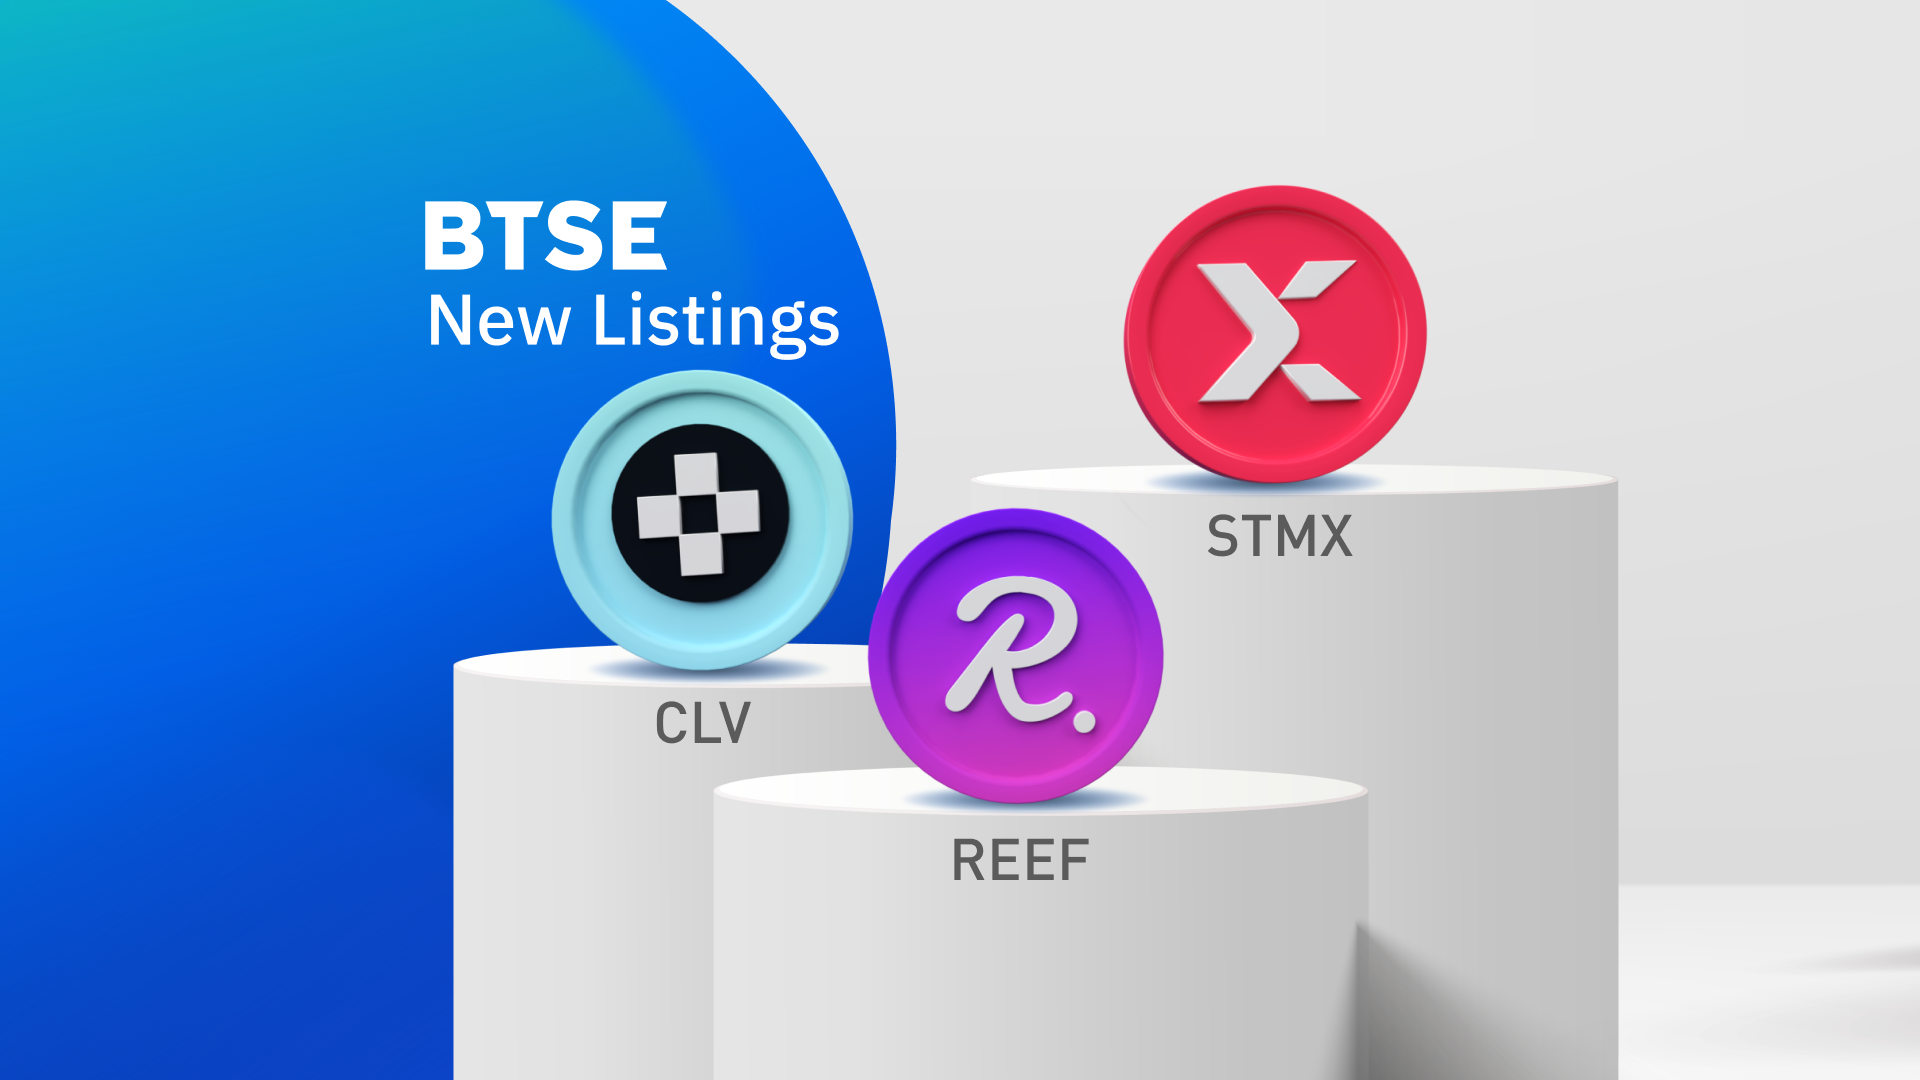 BTSE Lists CLV, REEF and STMX